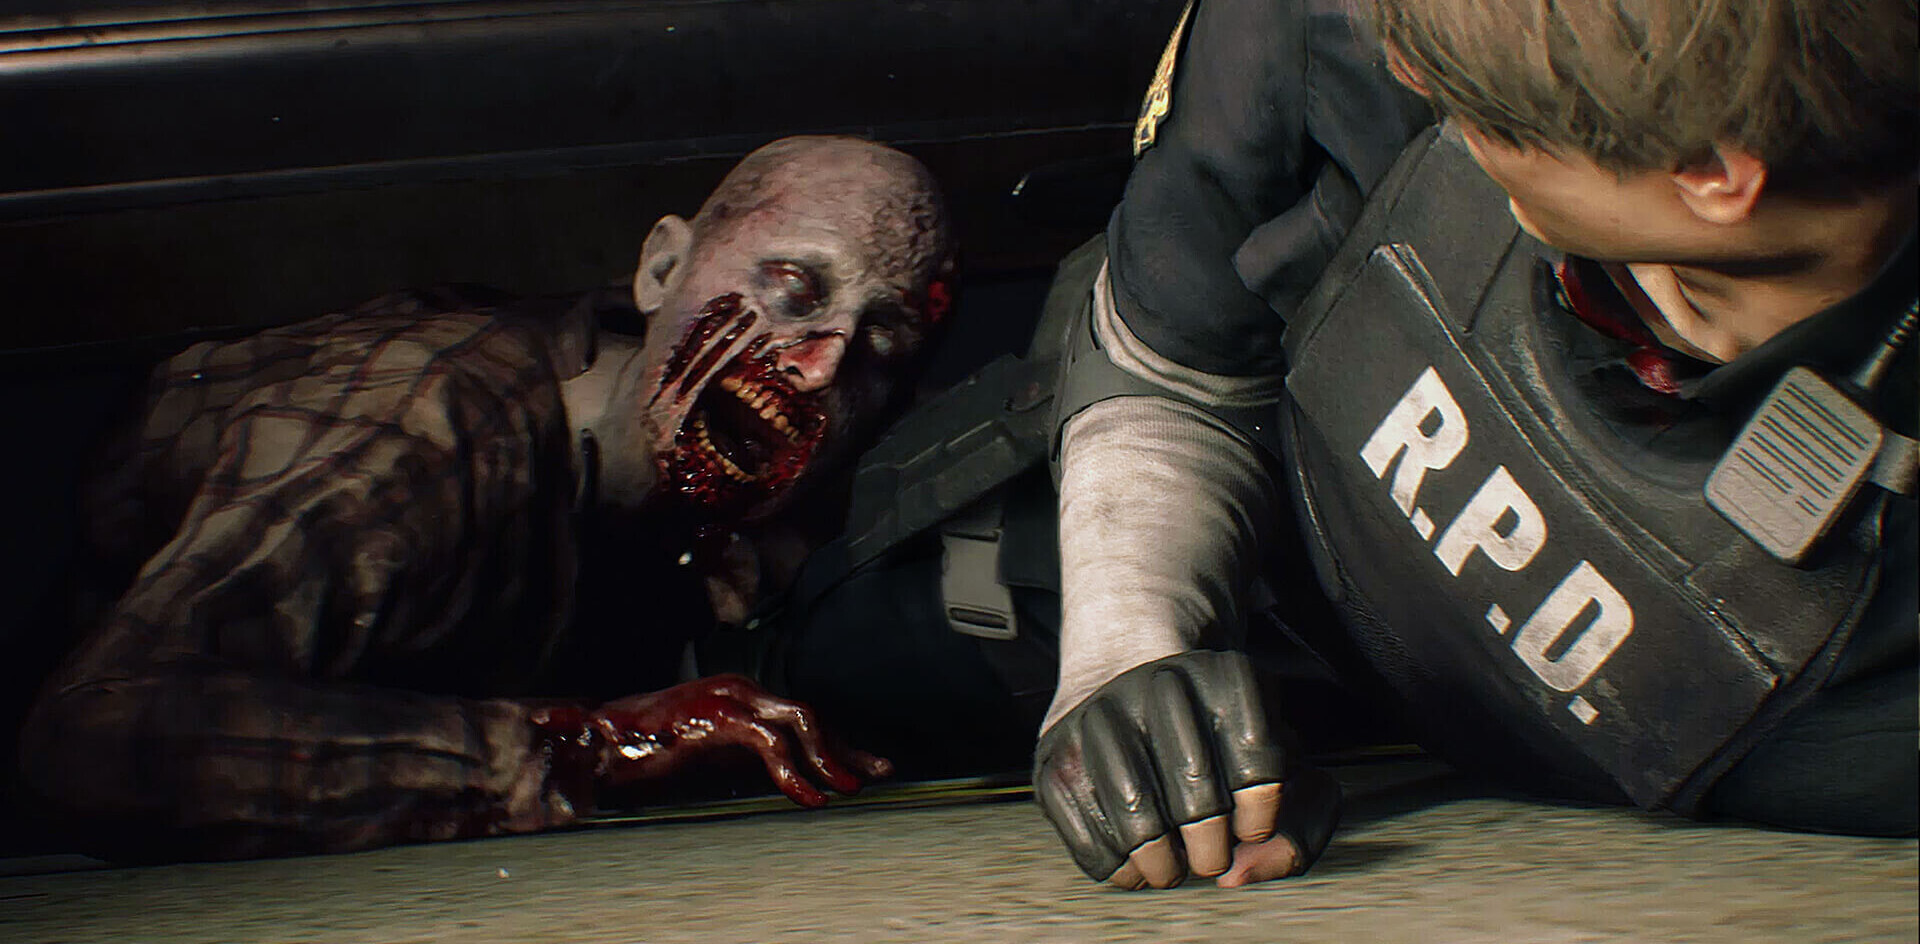 Wait, we’re getting yet more Resident Evil movies?